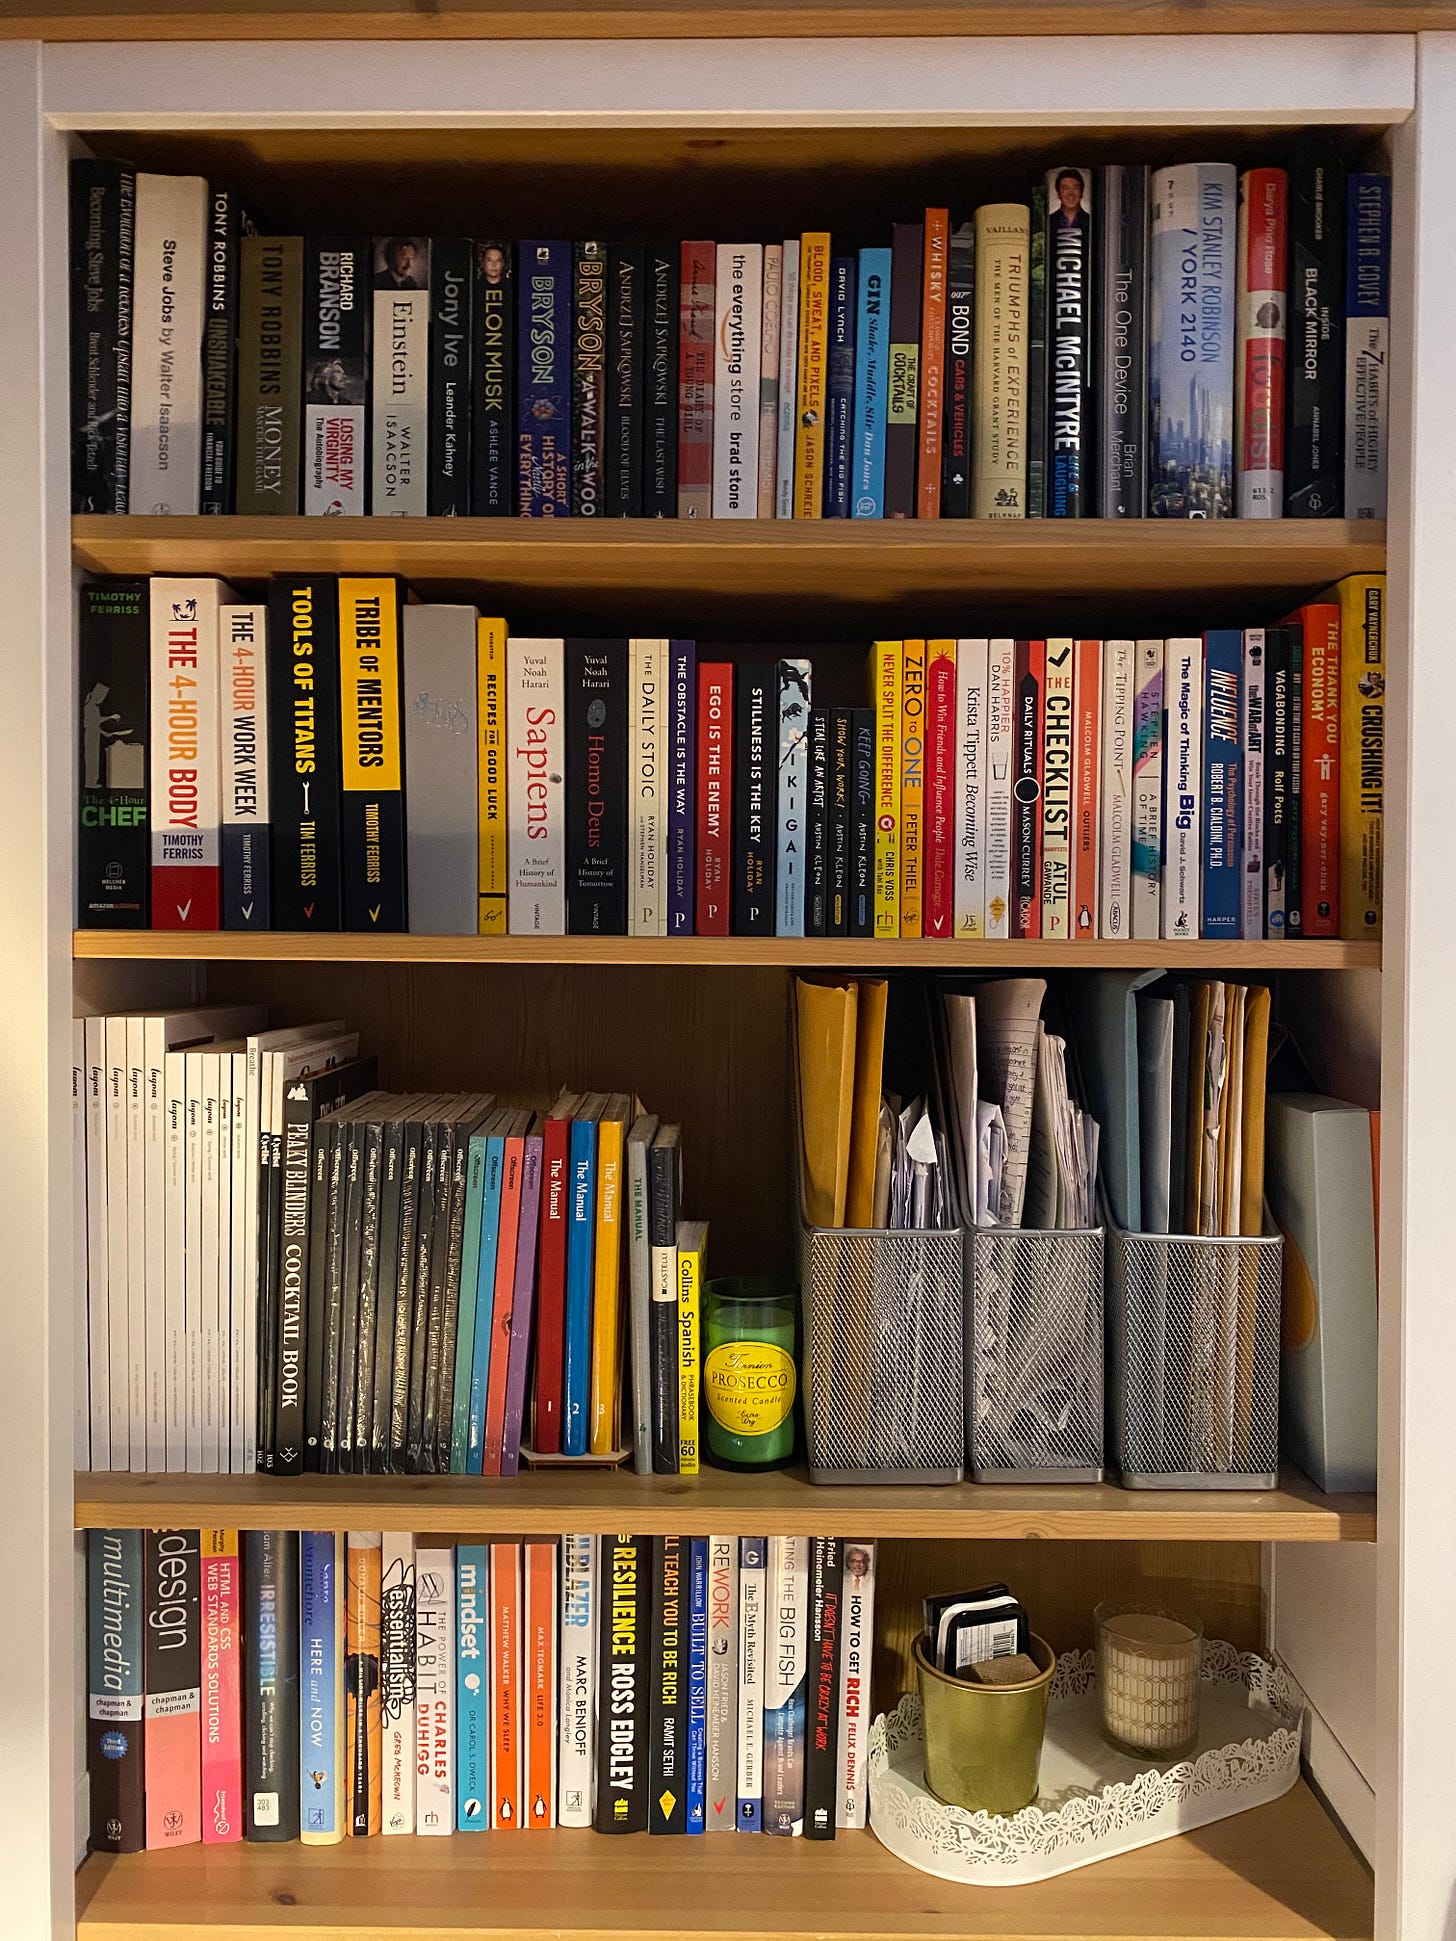 Photo of my personal bookcase, taken January 2021